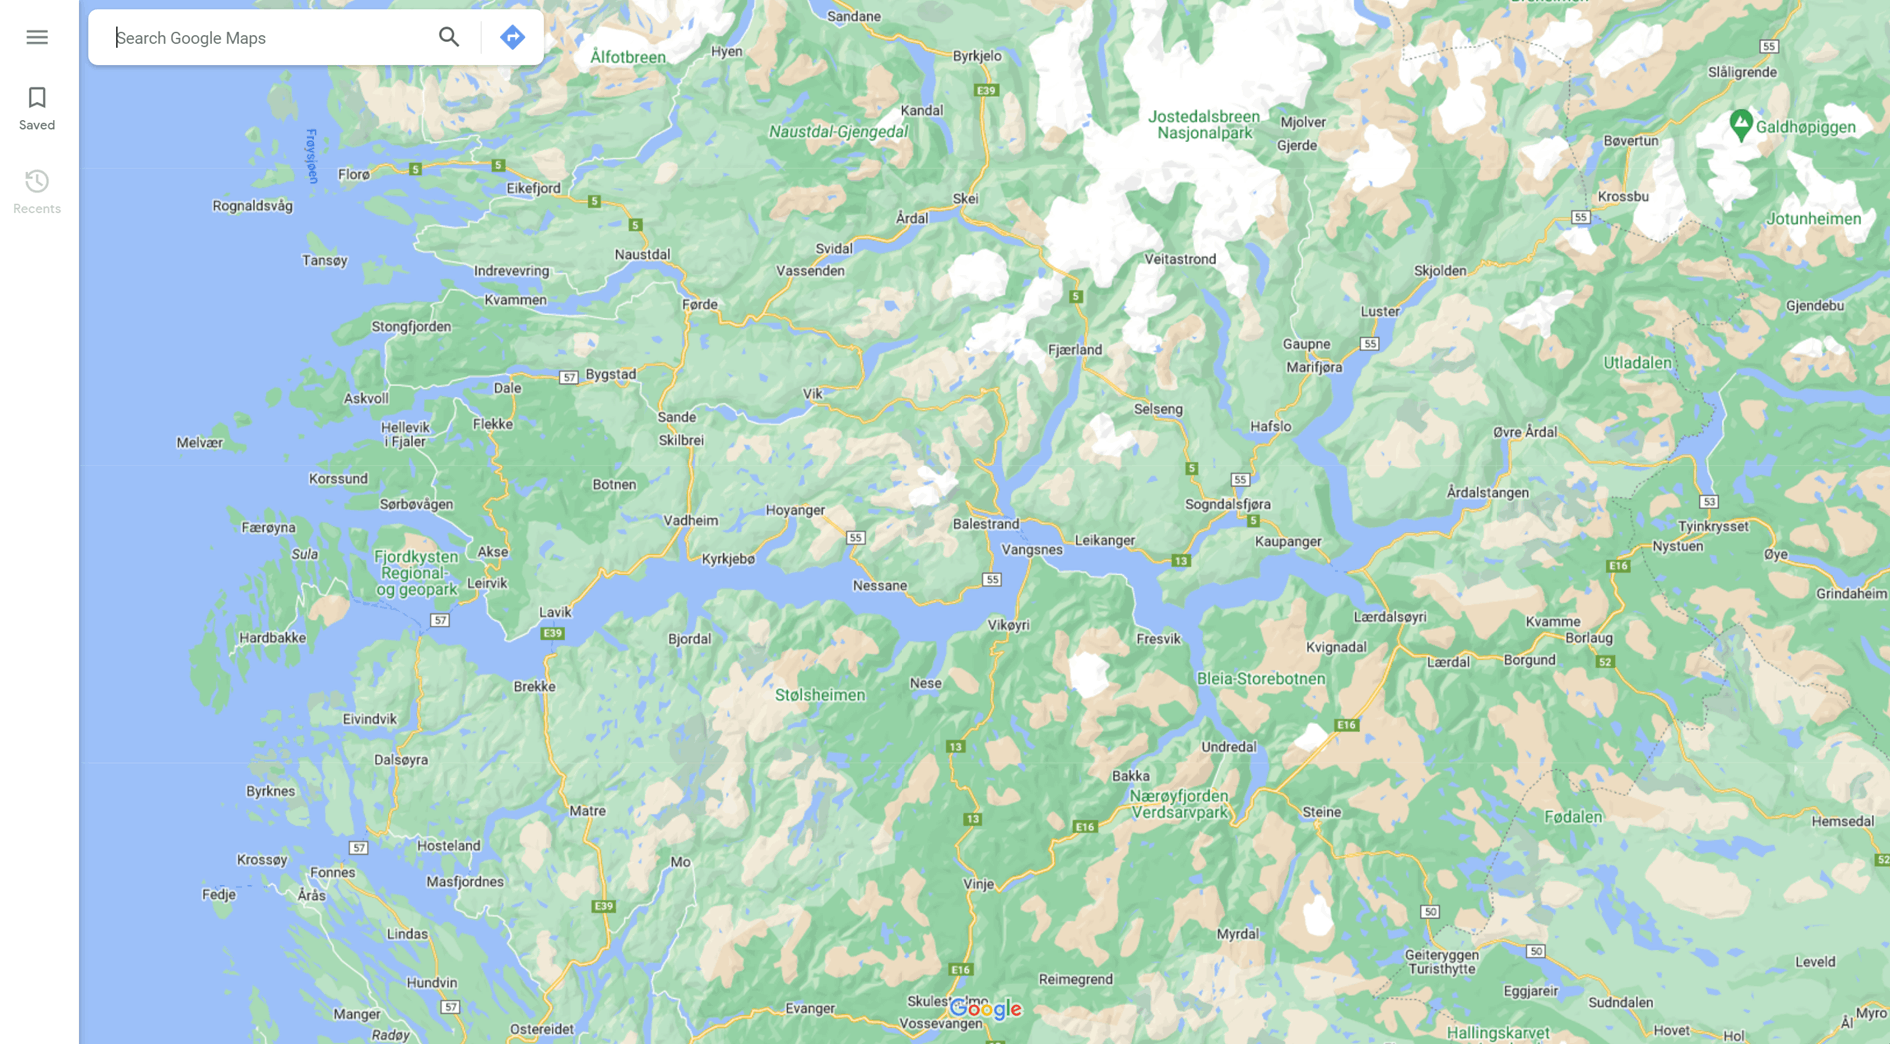 road not visible in google terrain map - Google Maps Community